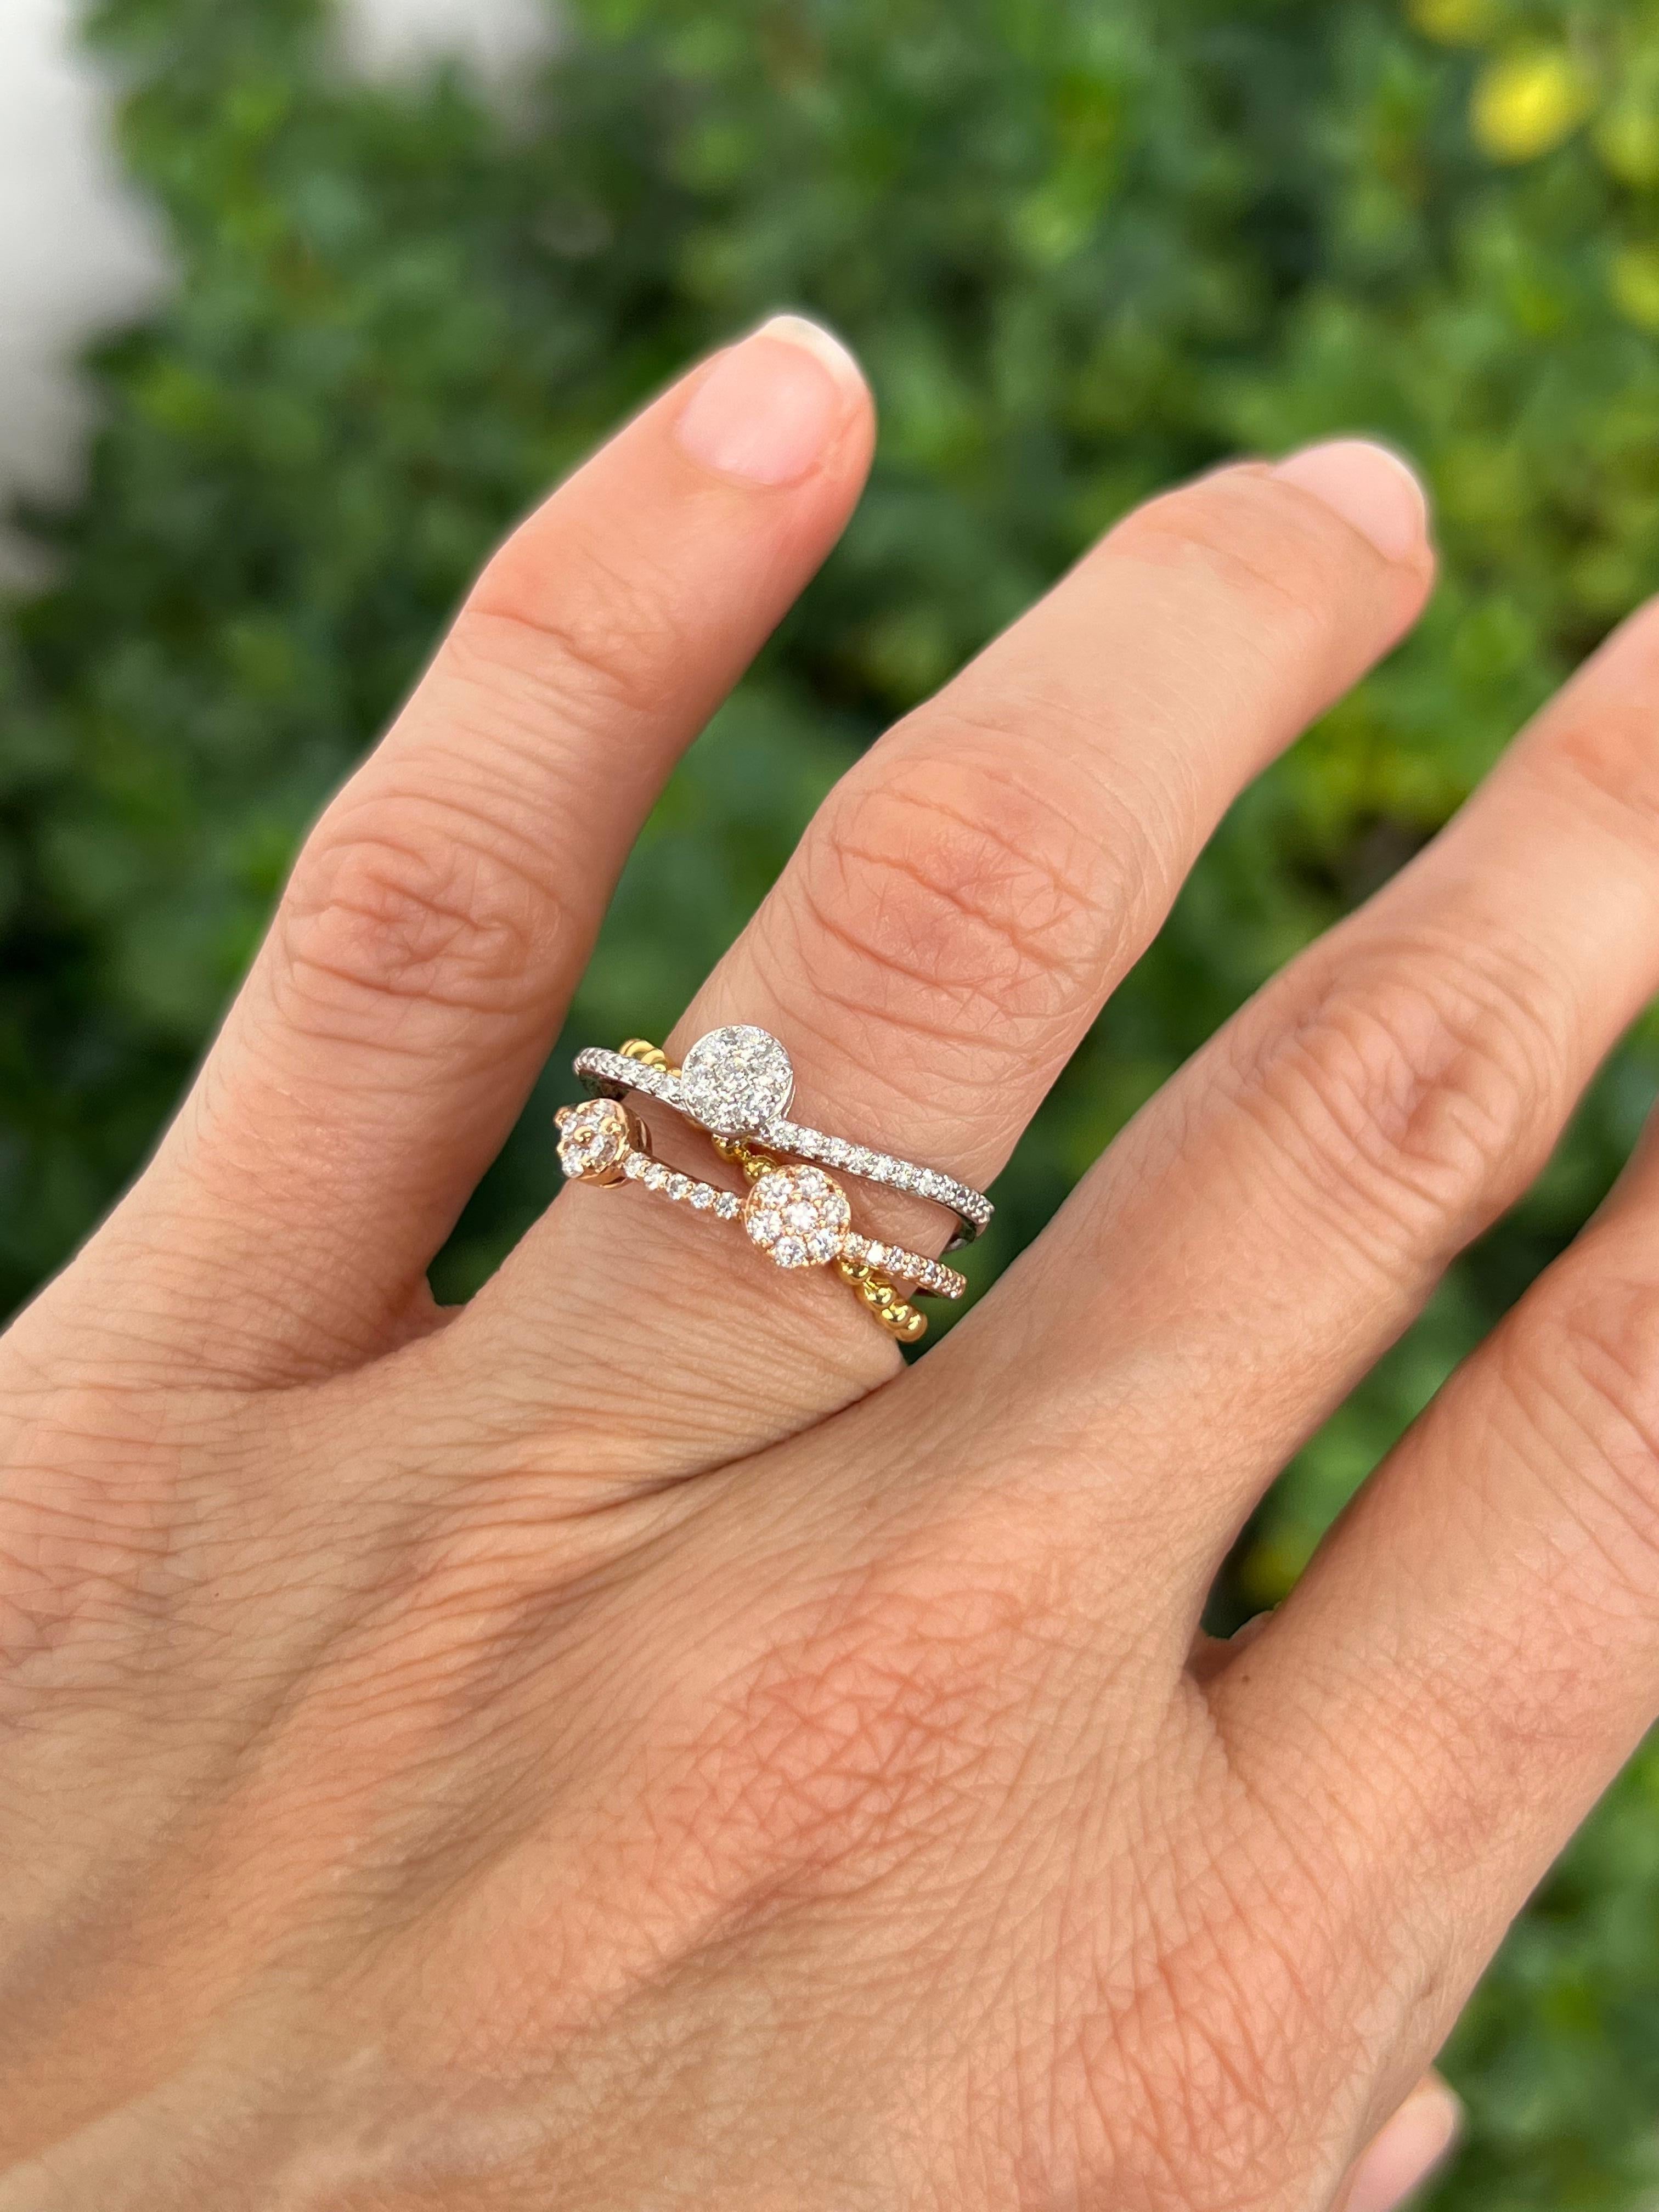 Movement and texture add interest to this tricolor ring. 

Features
18K yellow gold, white gold, ad rose gold
.58 carat total weight in diamonds
Ring size 6.5, can be sized. 